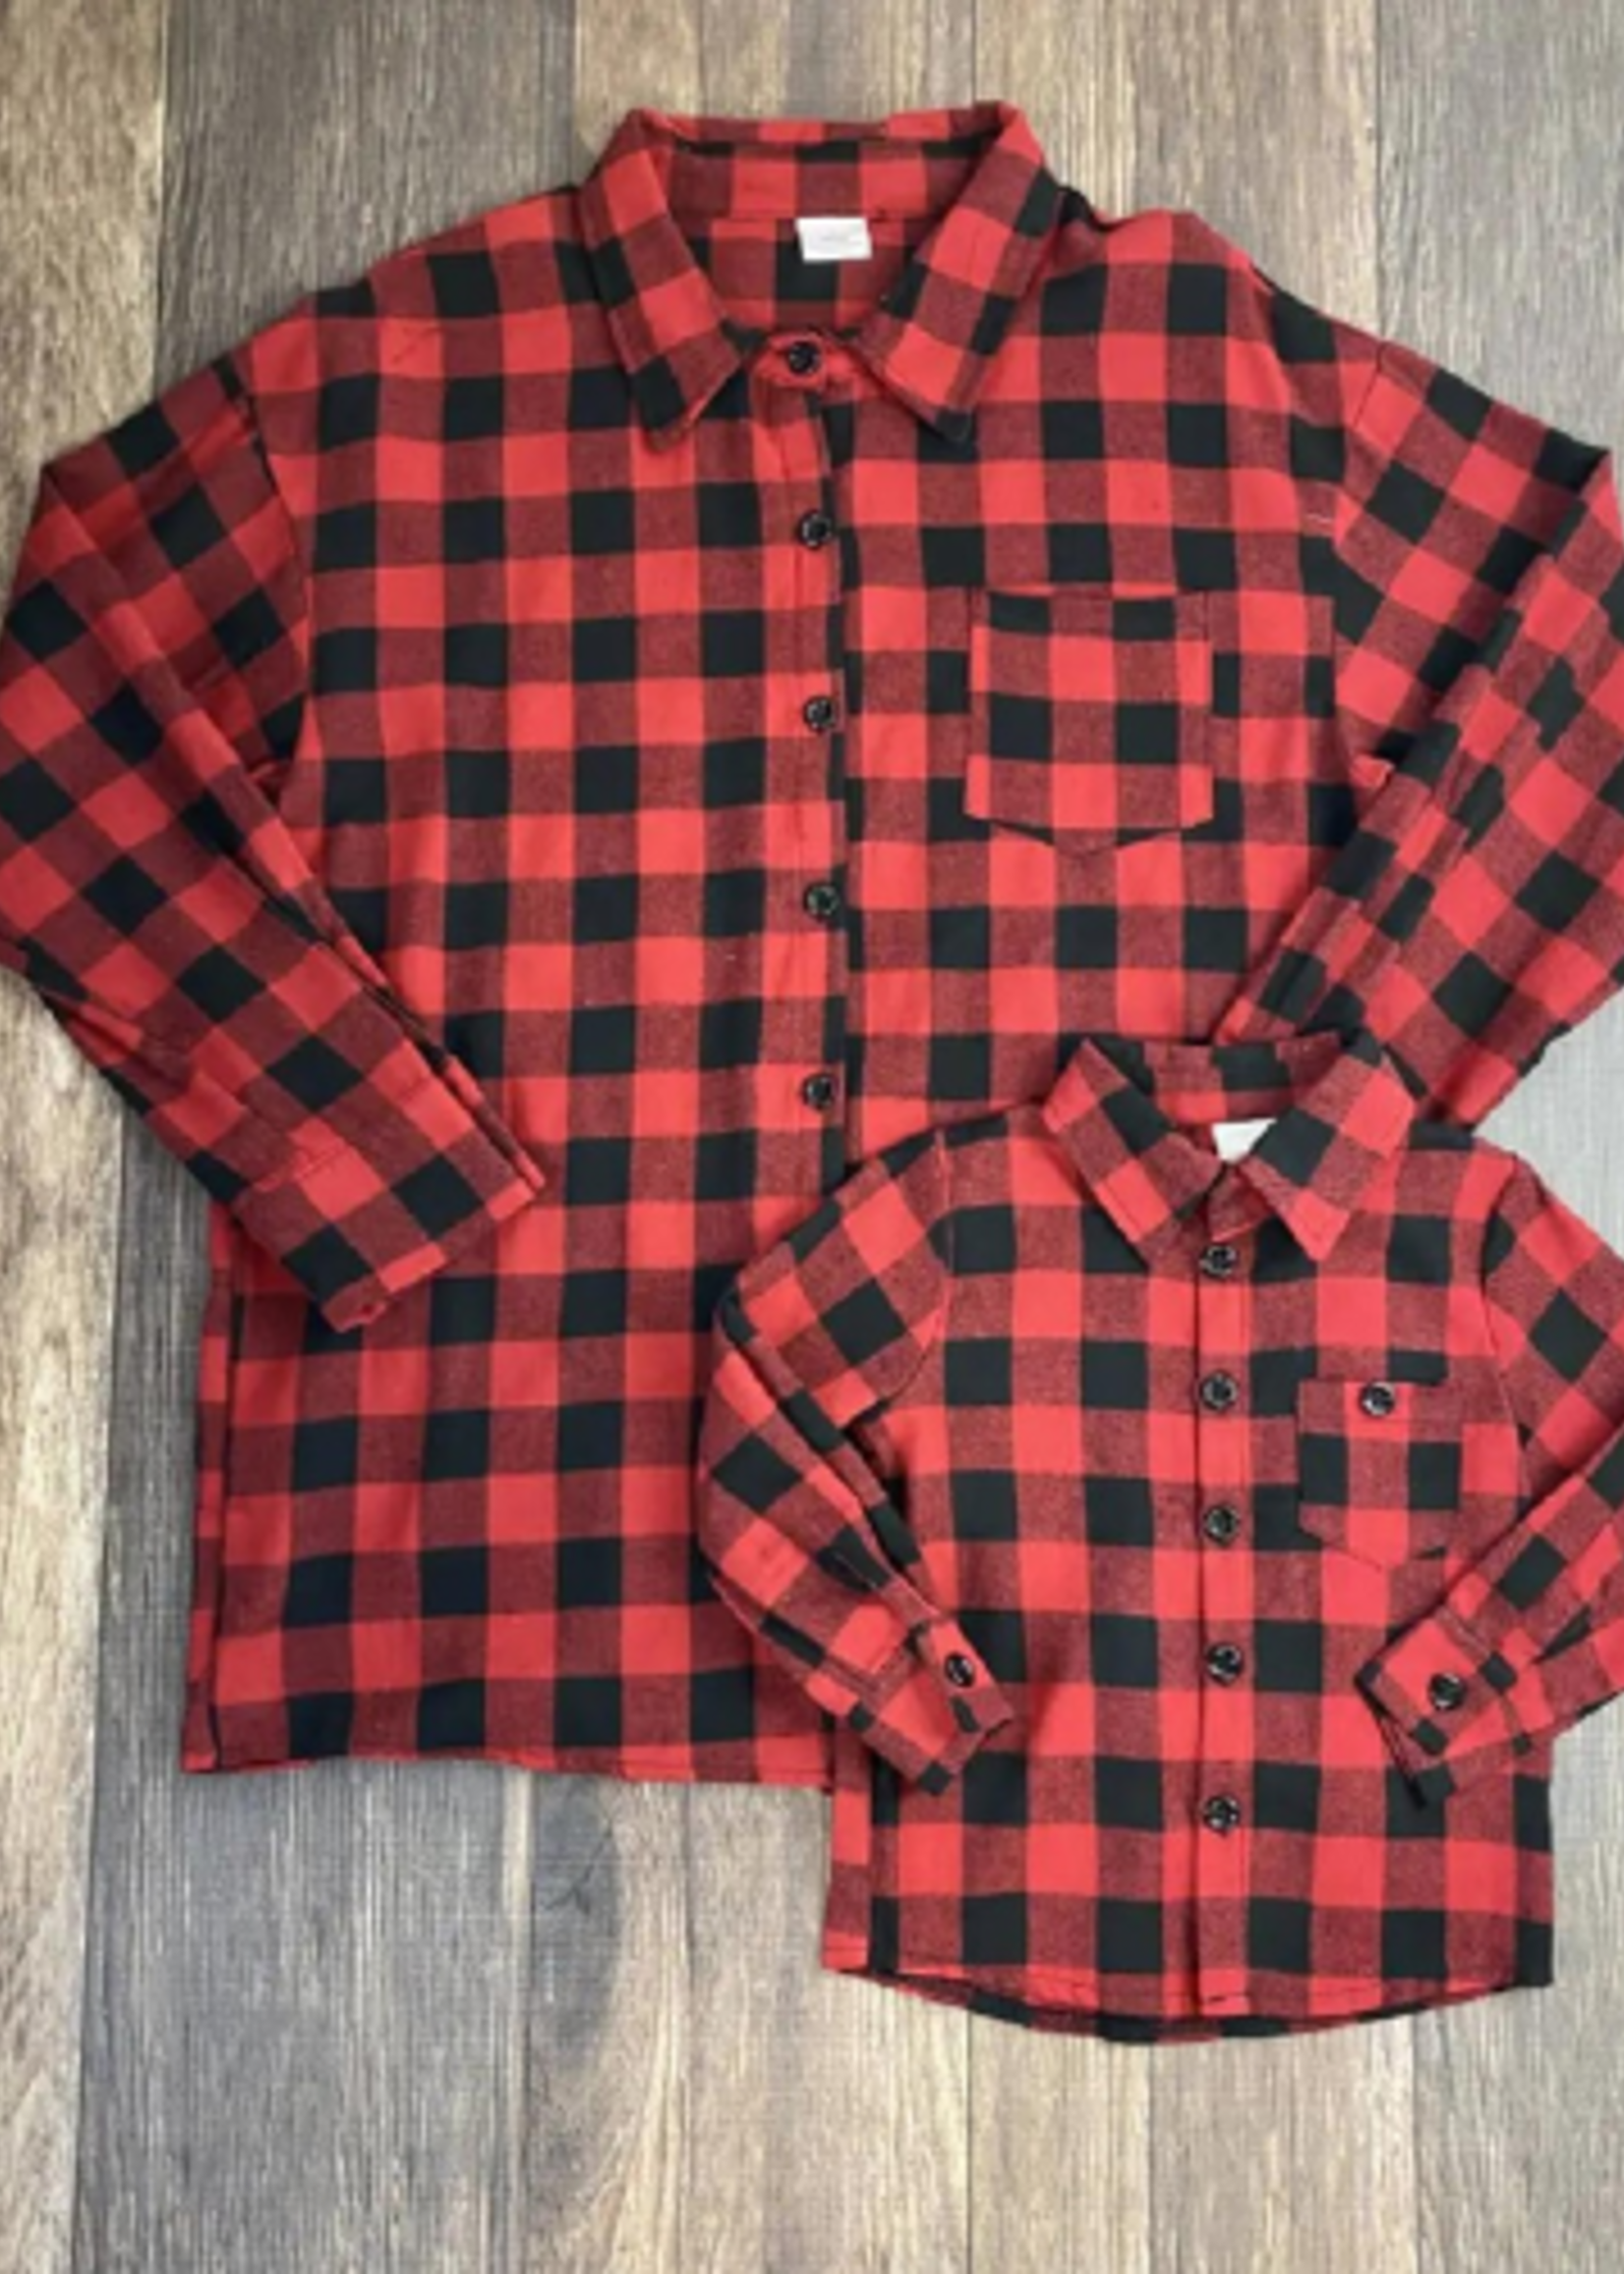 The Hair Bow Company Men's Red/Black Buffalo Plaid Flannel